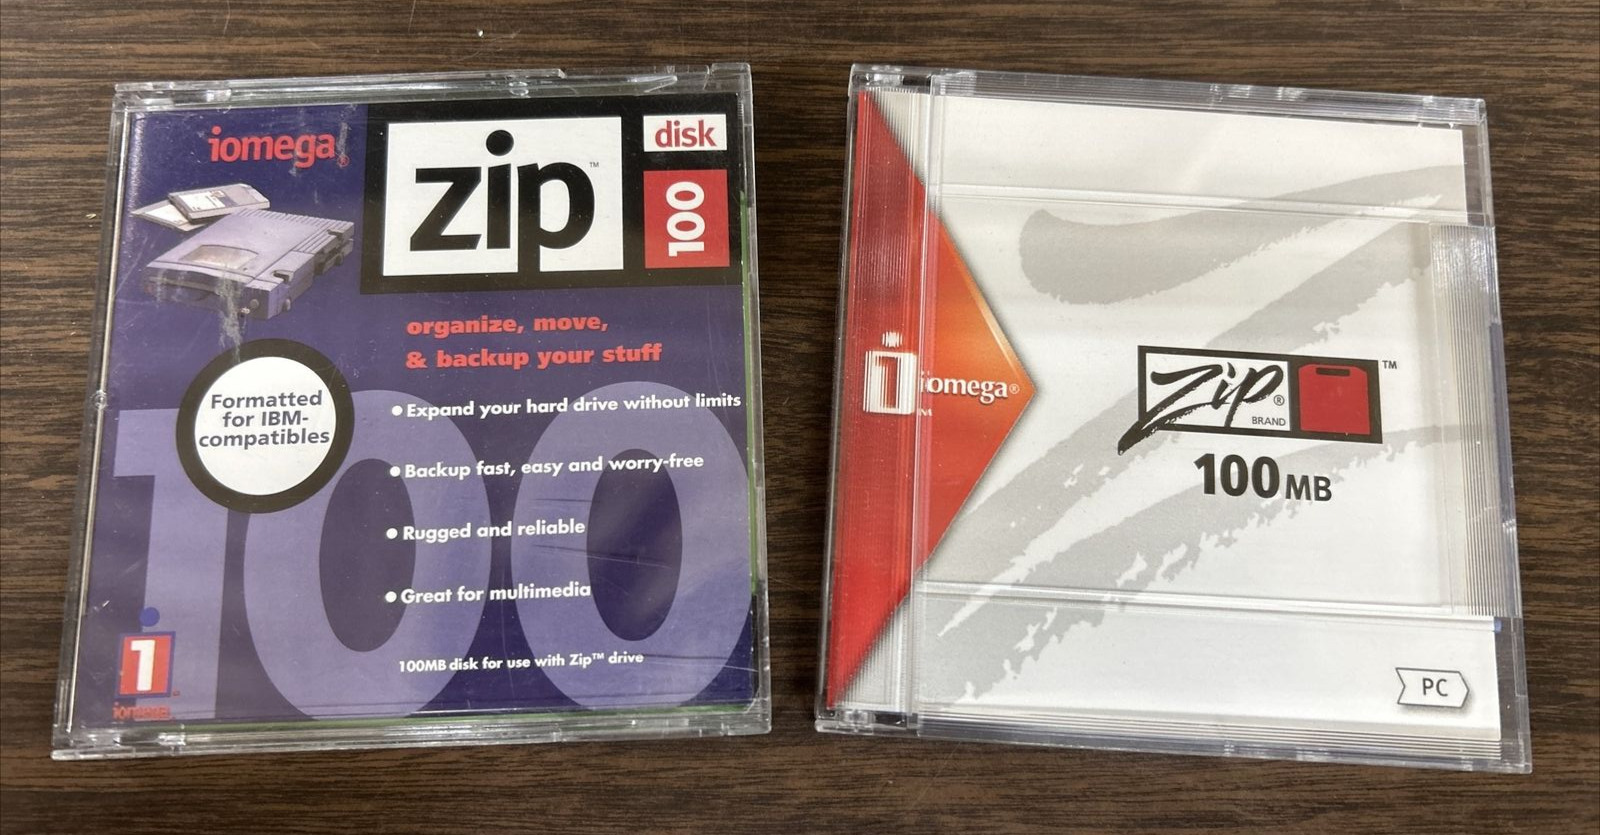 Iomega Zip 100 Disk Formatted For IBM New In Jewel Case UNUSED